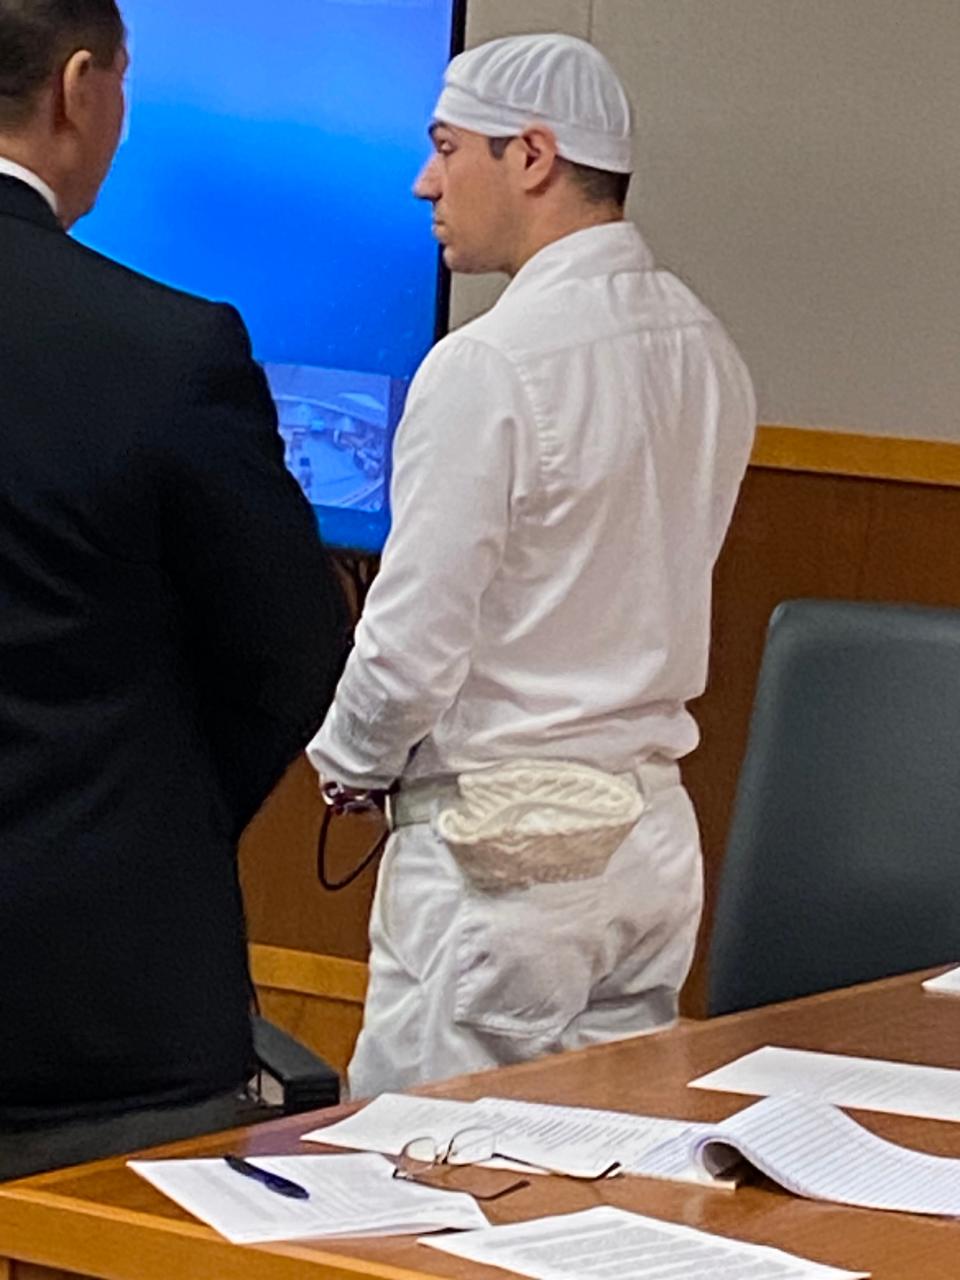 Michael R. Riley Jr., 27, is shown in court on June 12. A jury on Wednesday found Riley guilty of second-degree murder. He is a former prison guard charged with killing an inmate at Lake County Correctional Institution in June 2020.